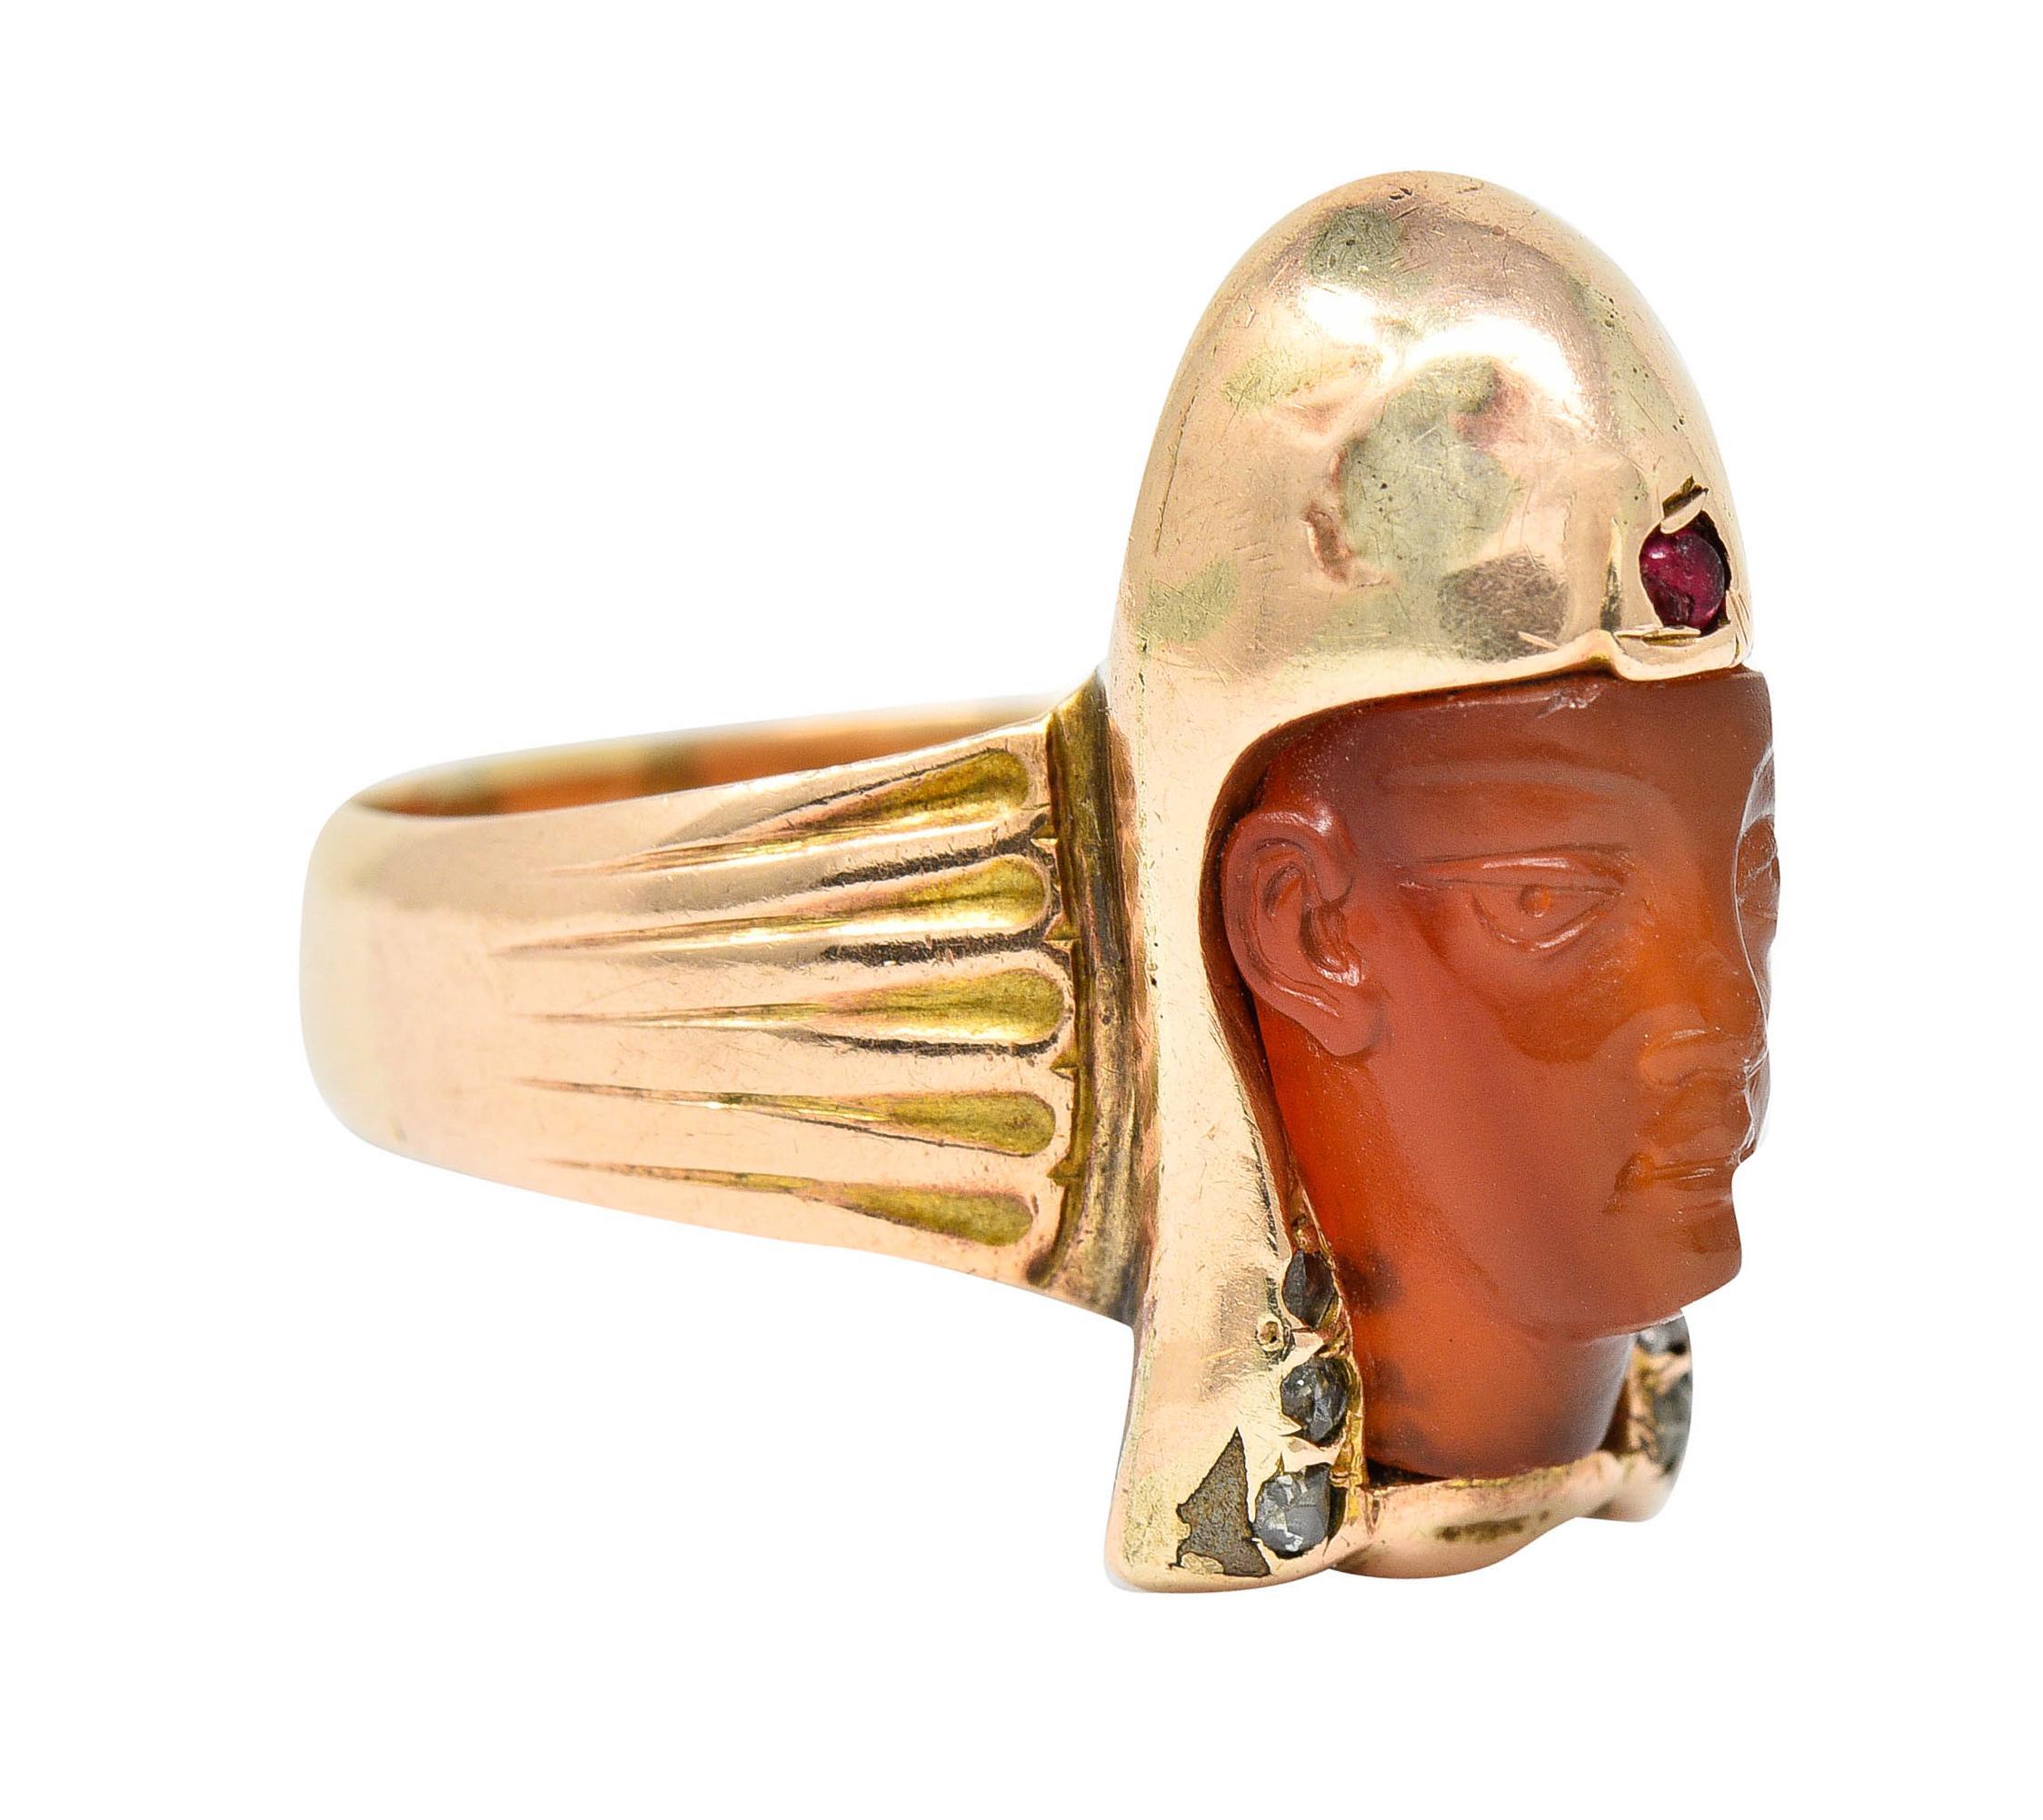 Band ring is designed as an Egyptian Pharaoh carved from carnelian - translucent orangey red

Crowned in a gleaming gold headdress accented by rose cut diamonds and a round cut ruby

Completed by stylized and ribbed shoulders

Tested as 14 karat